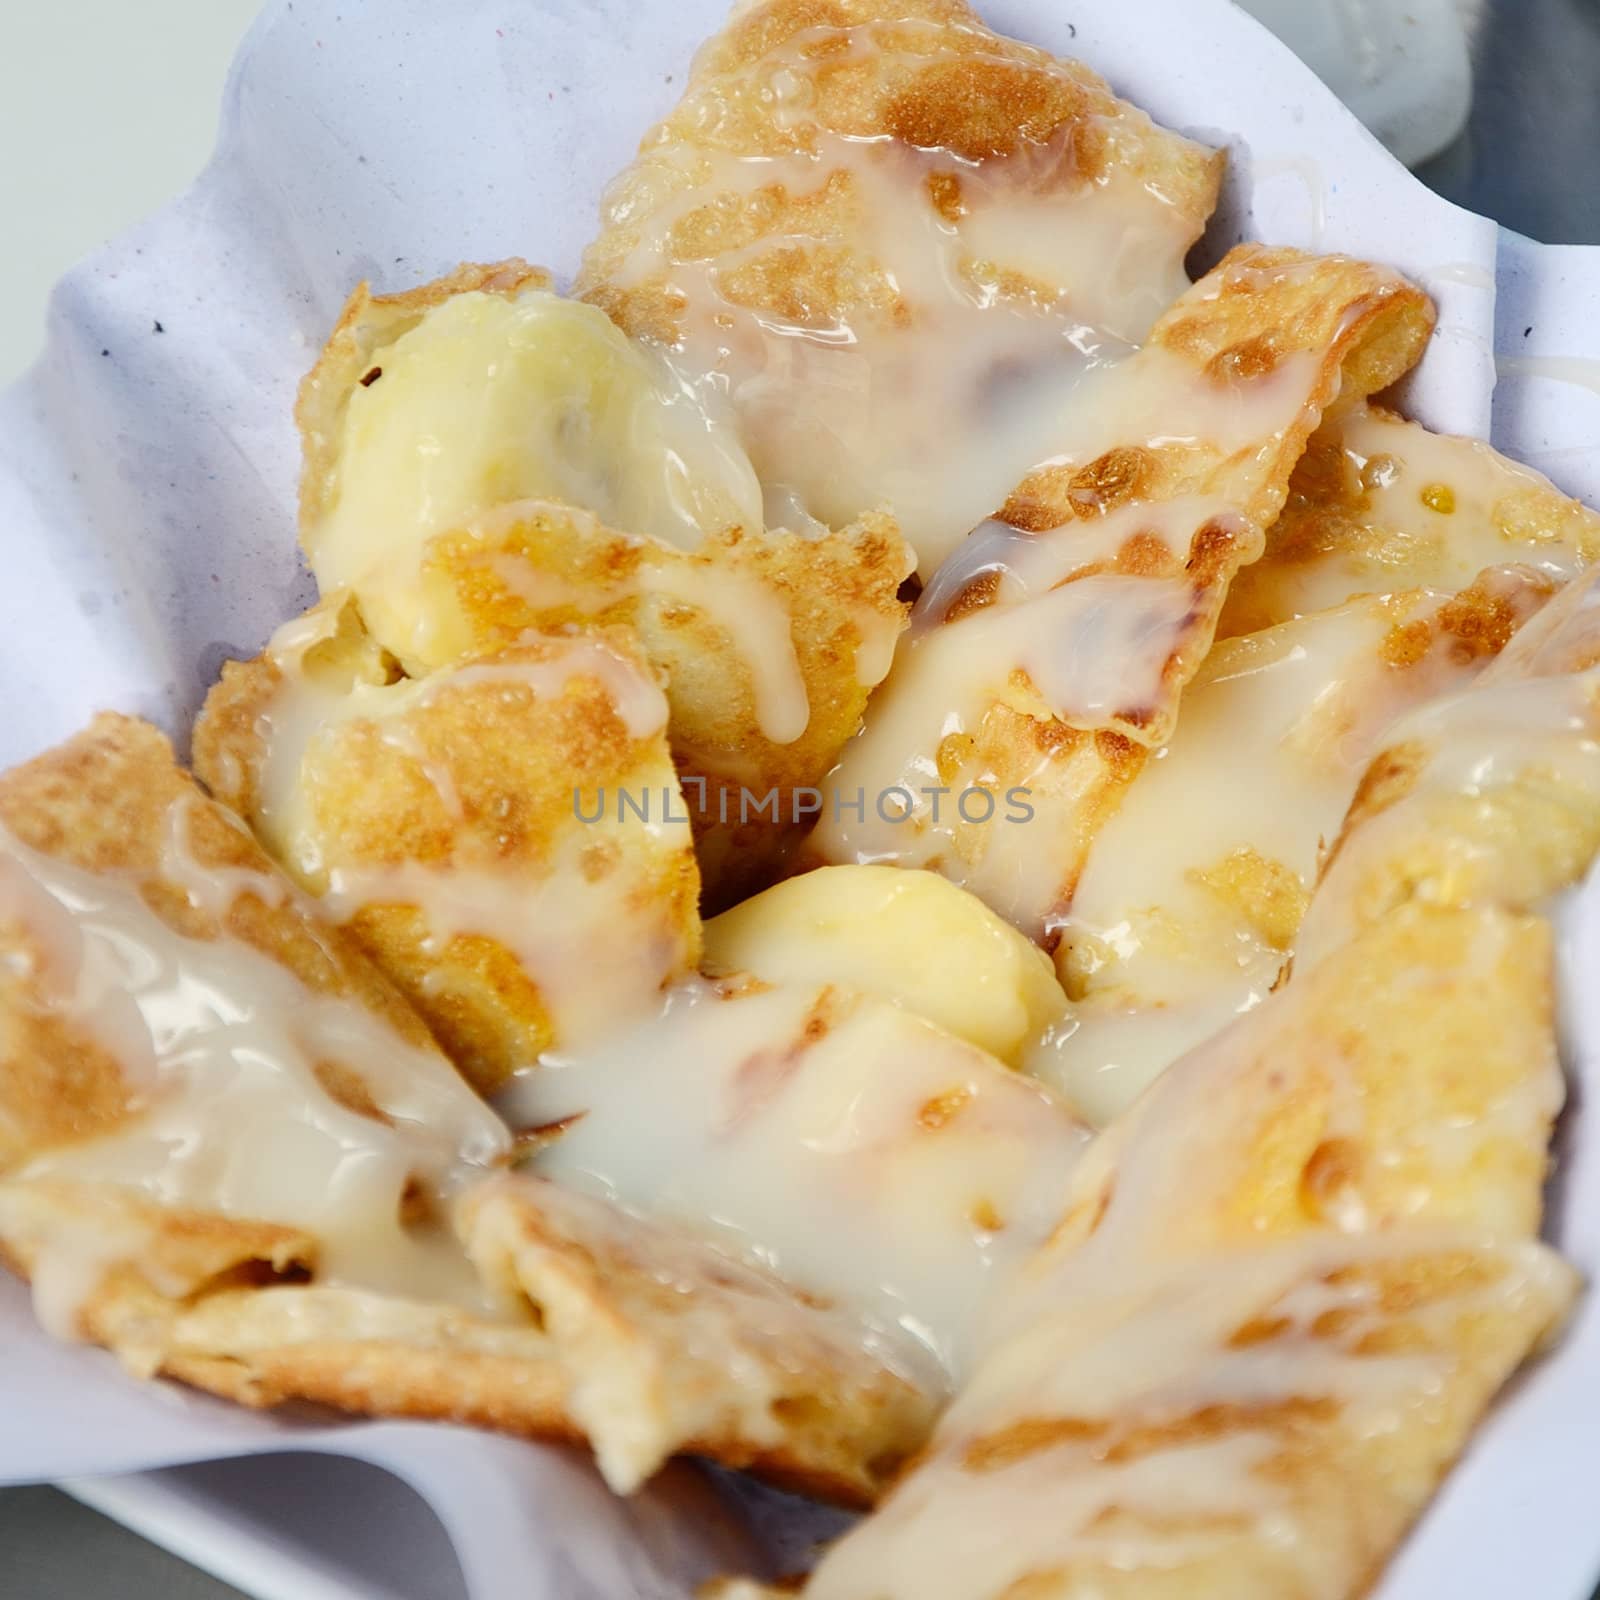 Dessert style of fried Roti with banana in Thailand by pixbox77